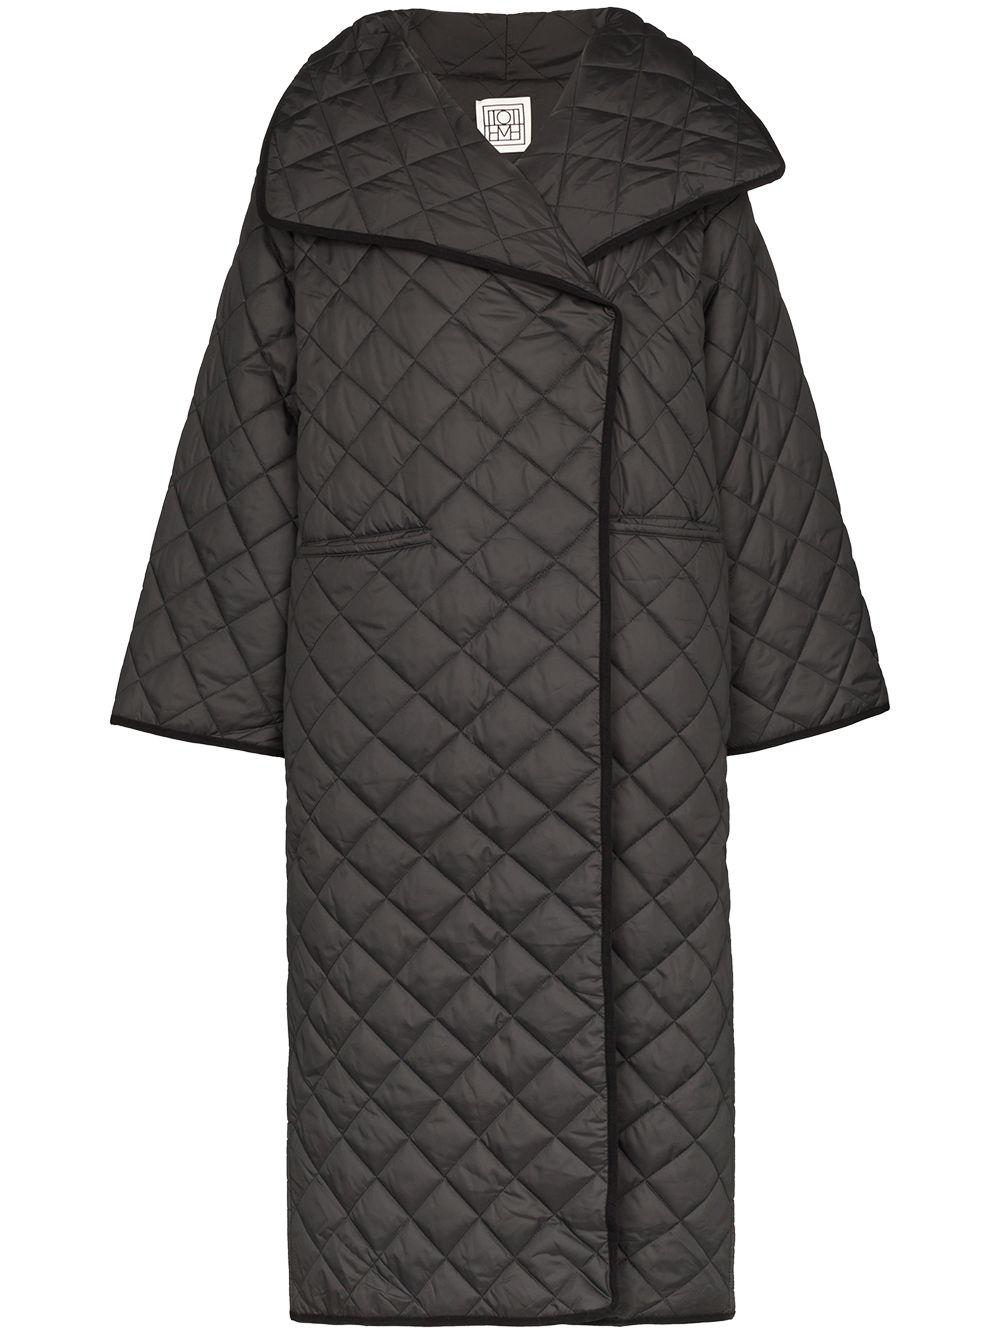 Totême Annecy Quilted Coat in Black - Lyst